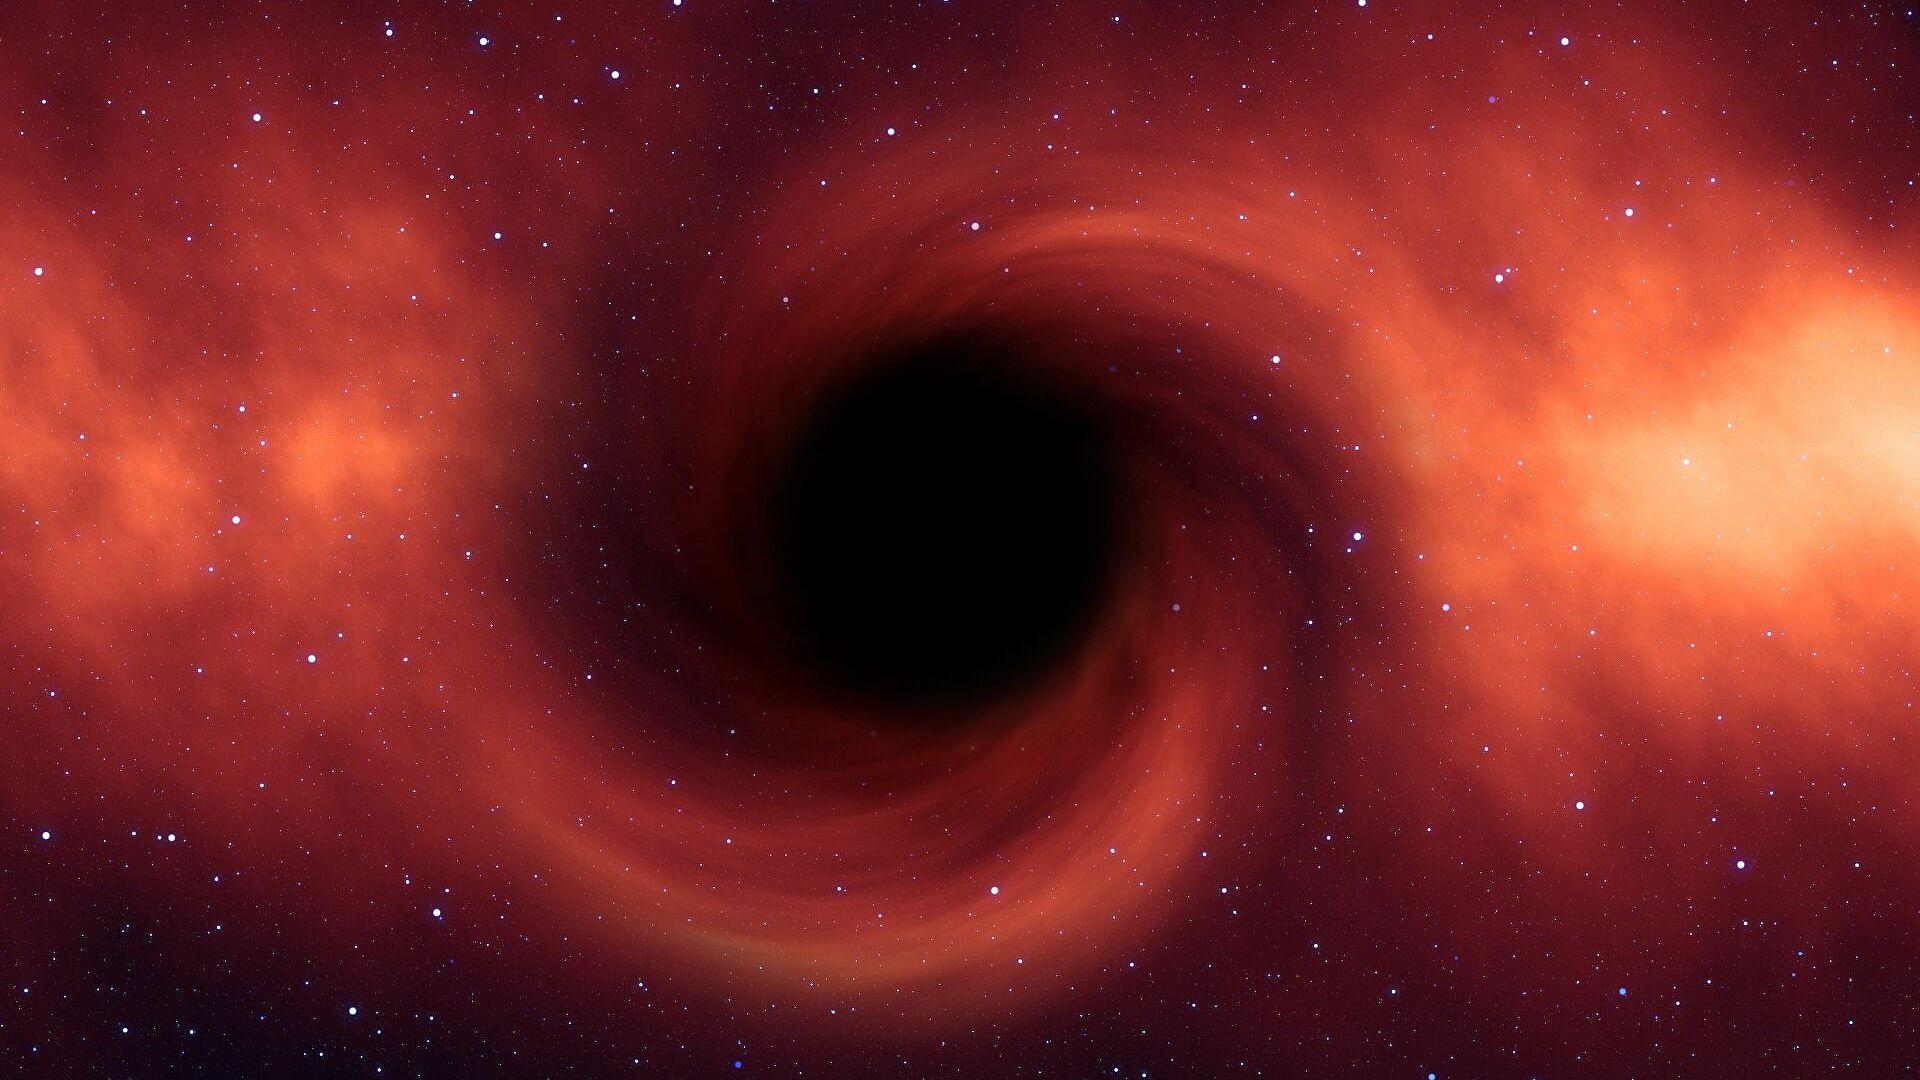 The One Percent: Rough Number of Stellar-Mass Black Holes in Universe Estimated by Scientists